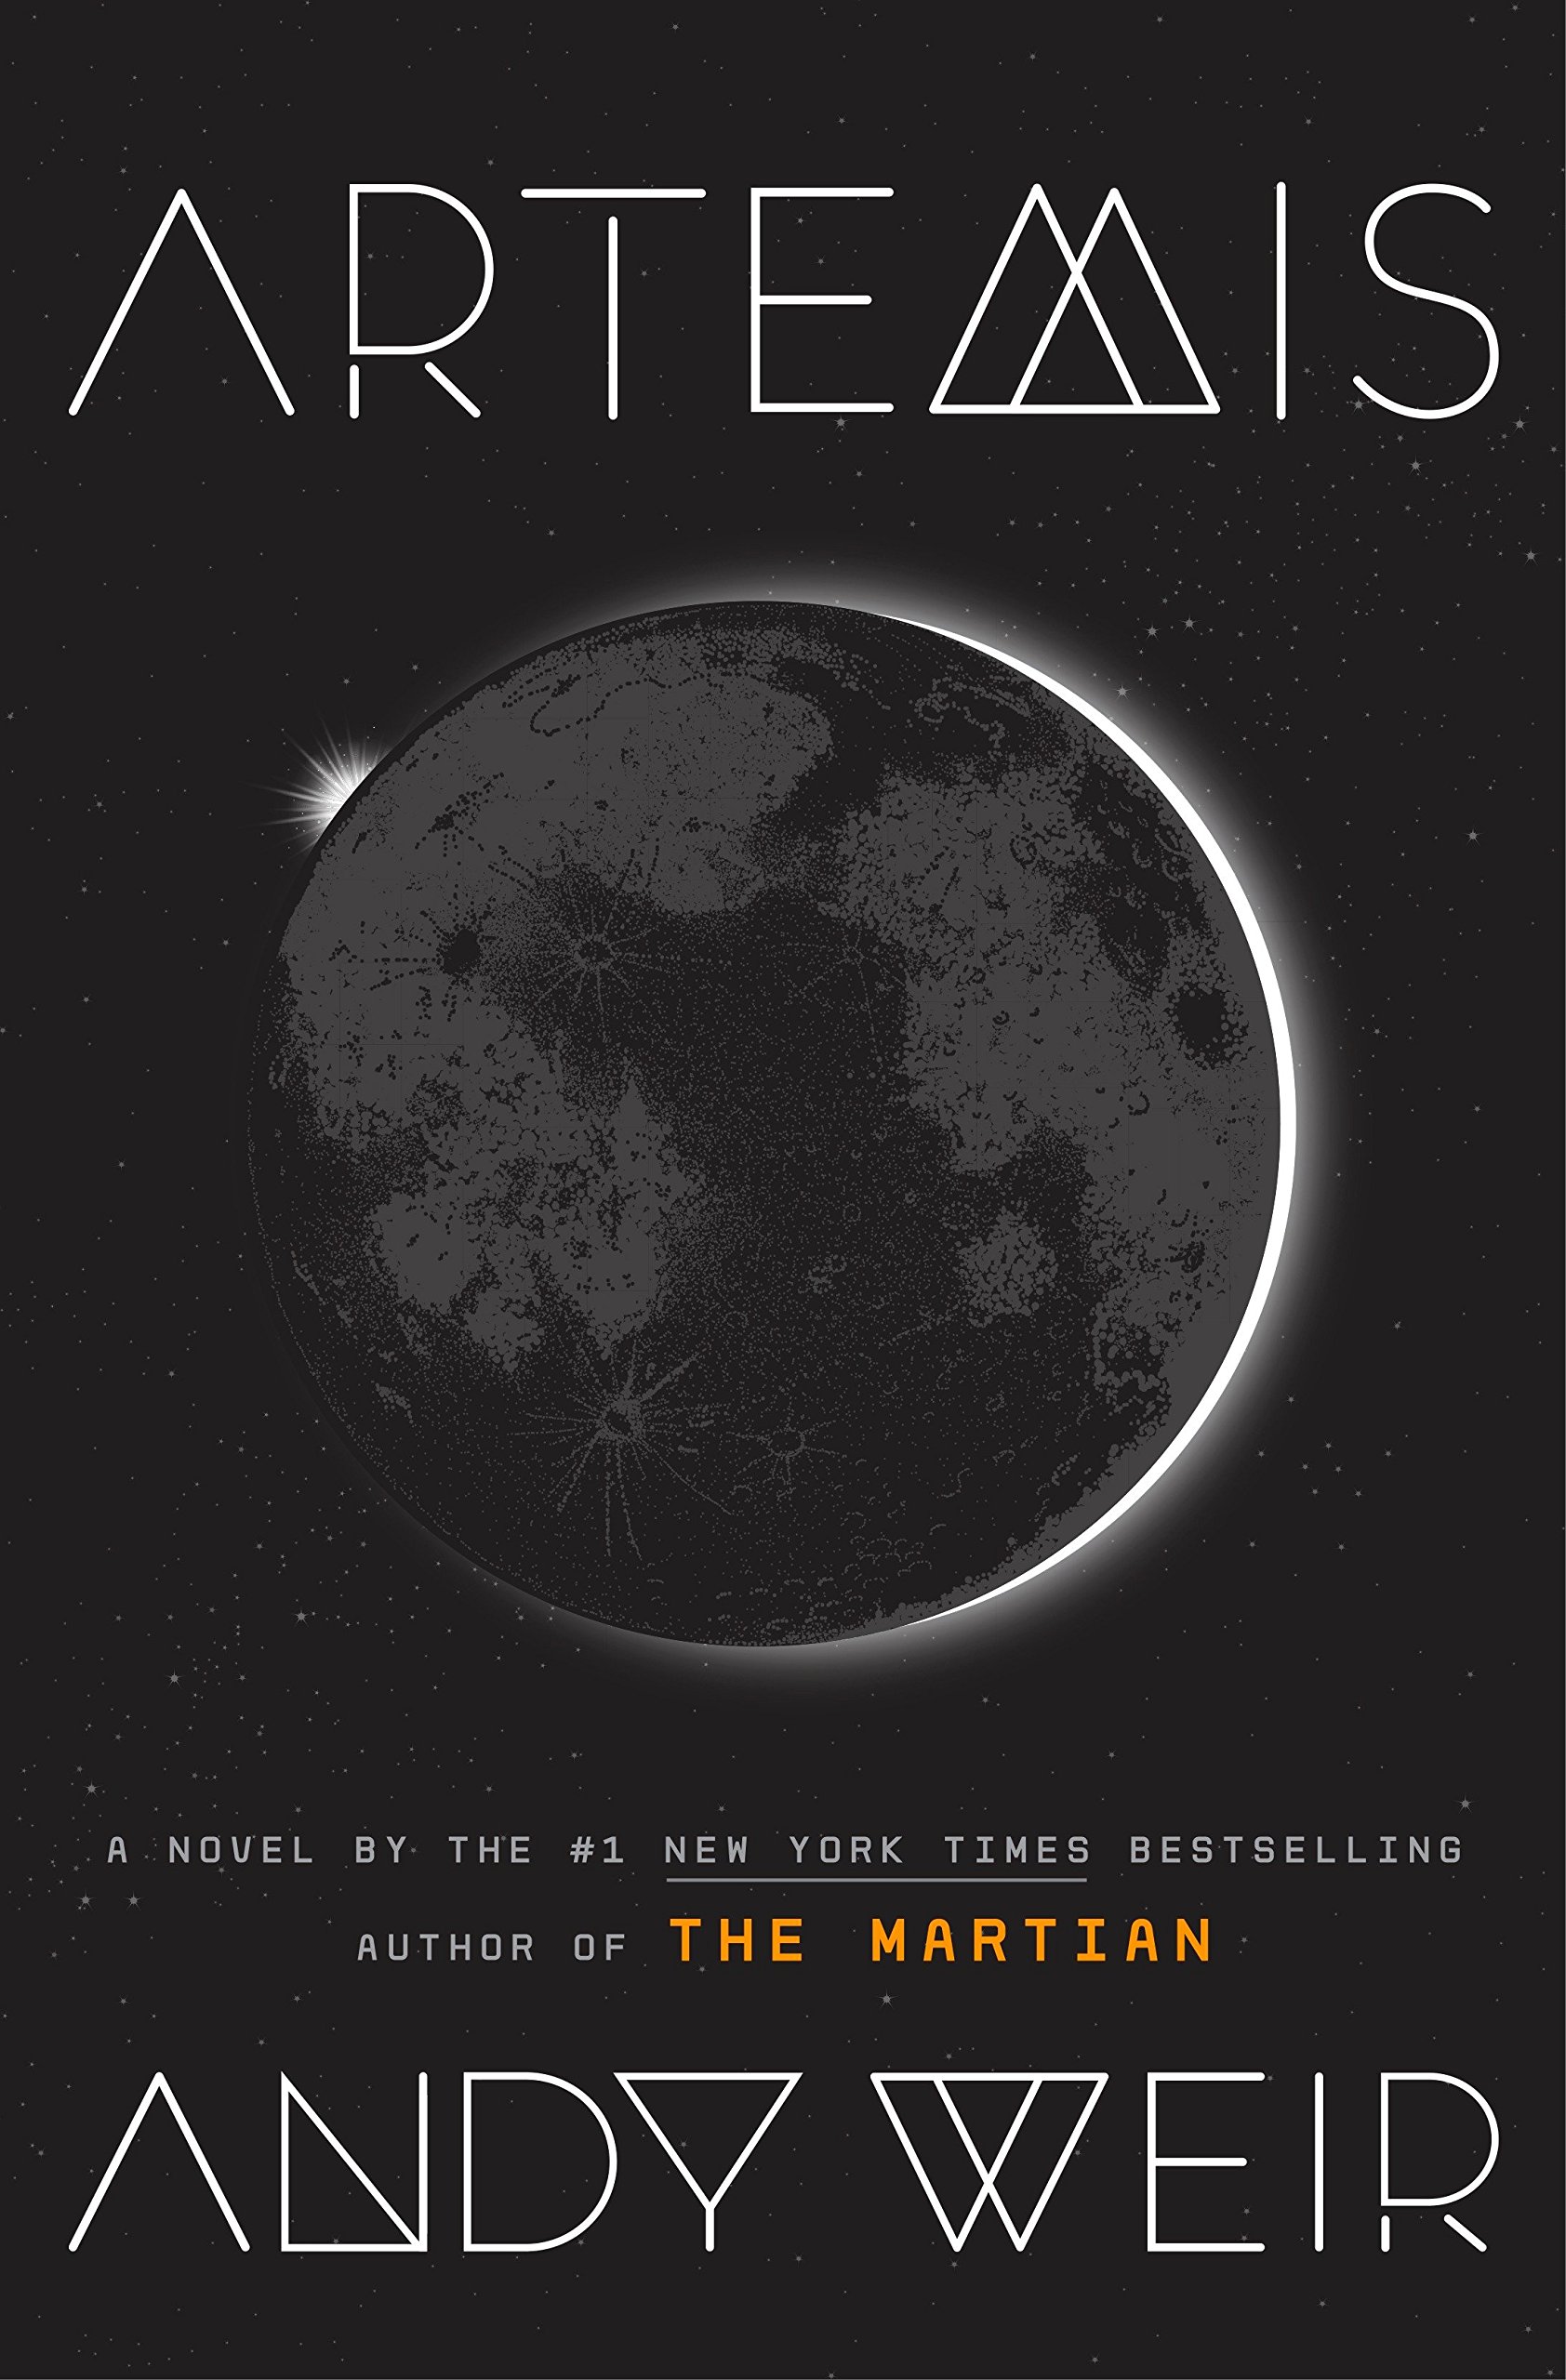 Review of Artemis by Andy Weir